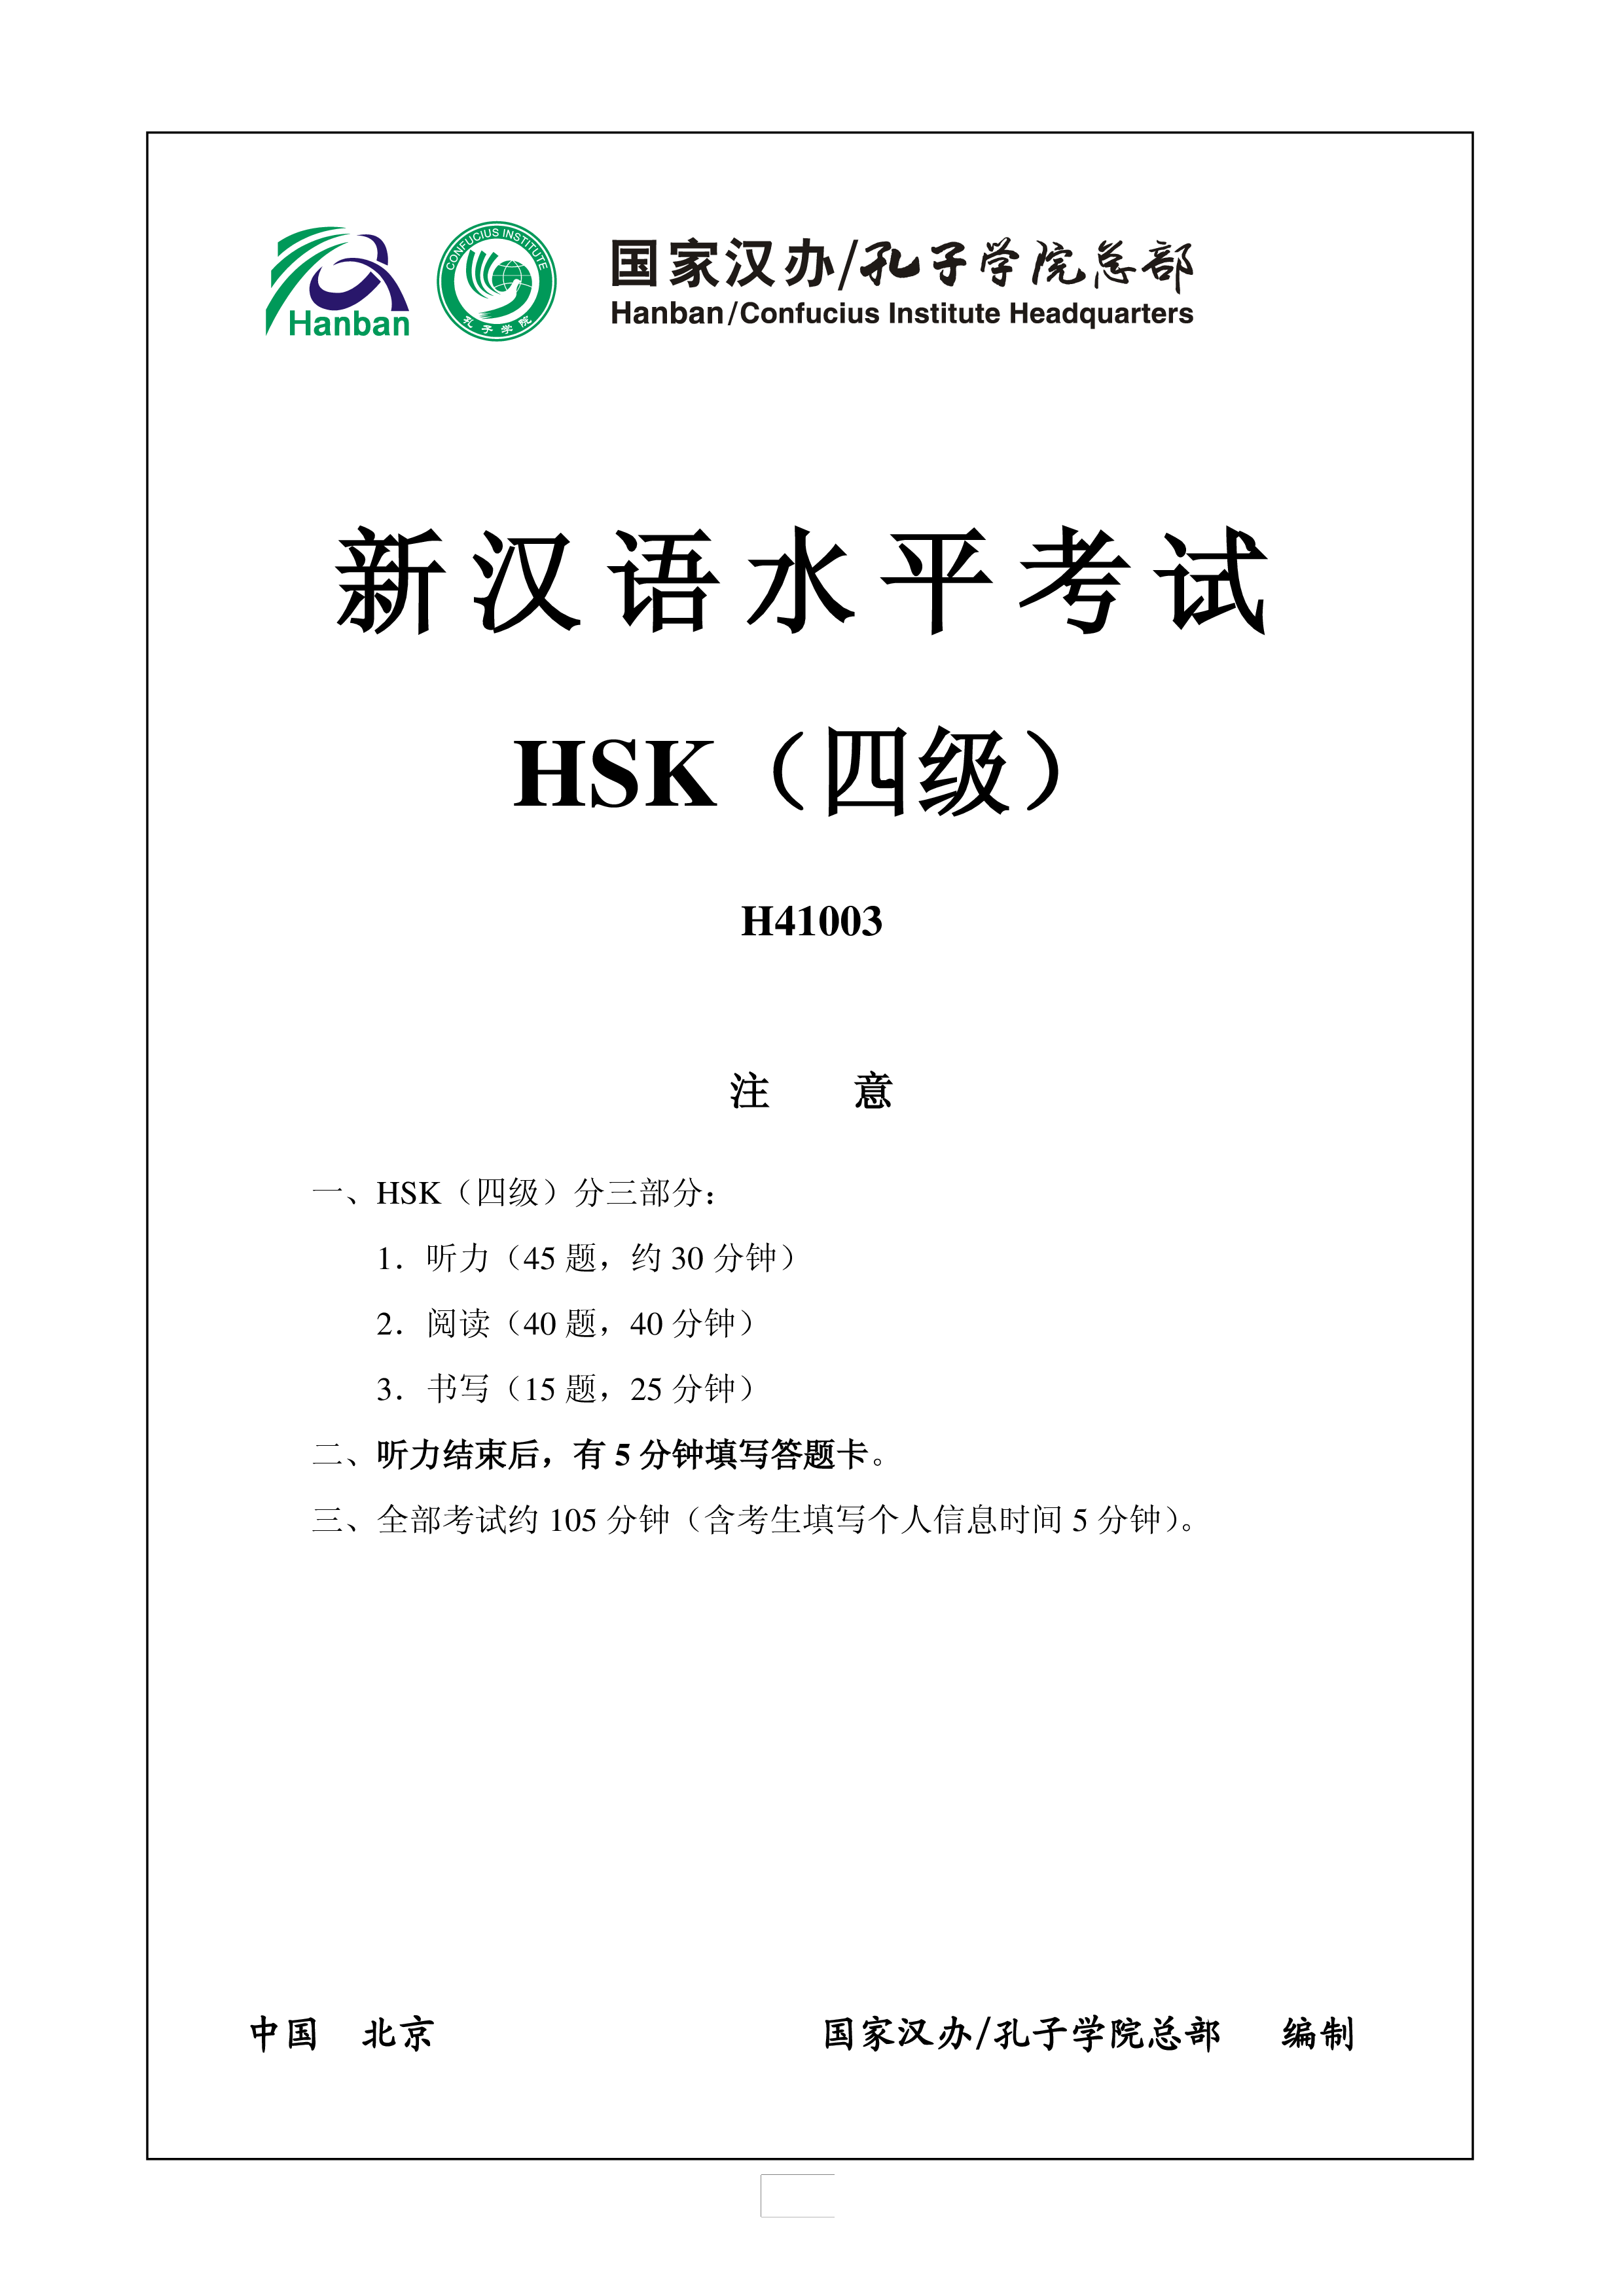 hsk4 chinese exam including answers # hsk h41003 voorbeeld afbeelding 